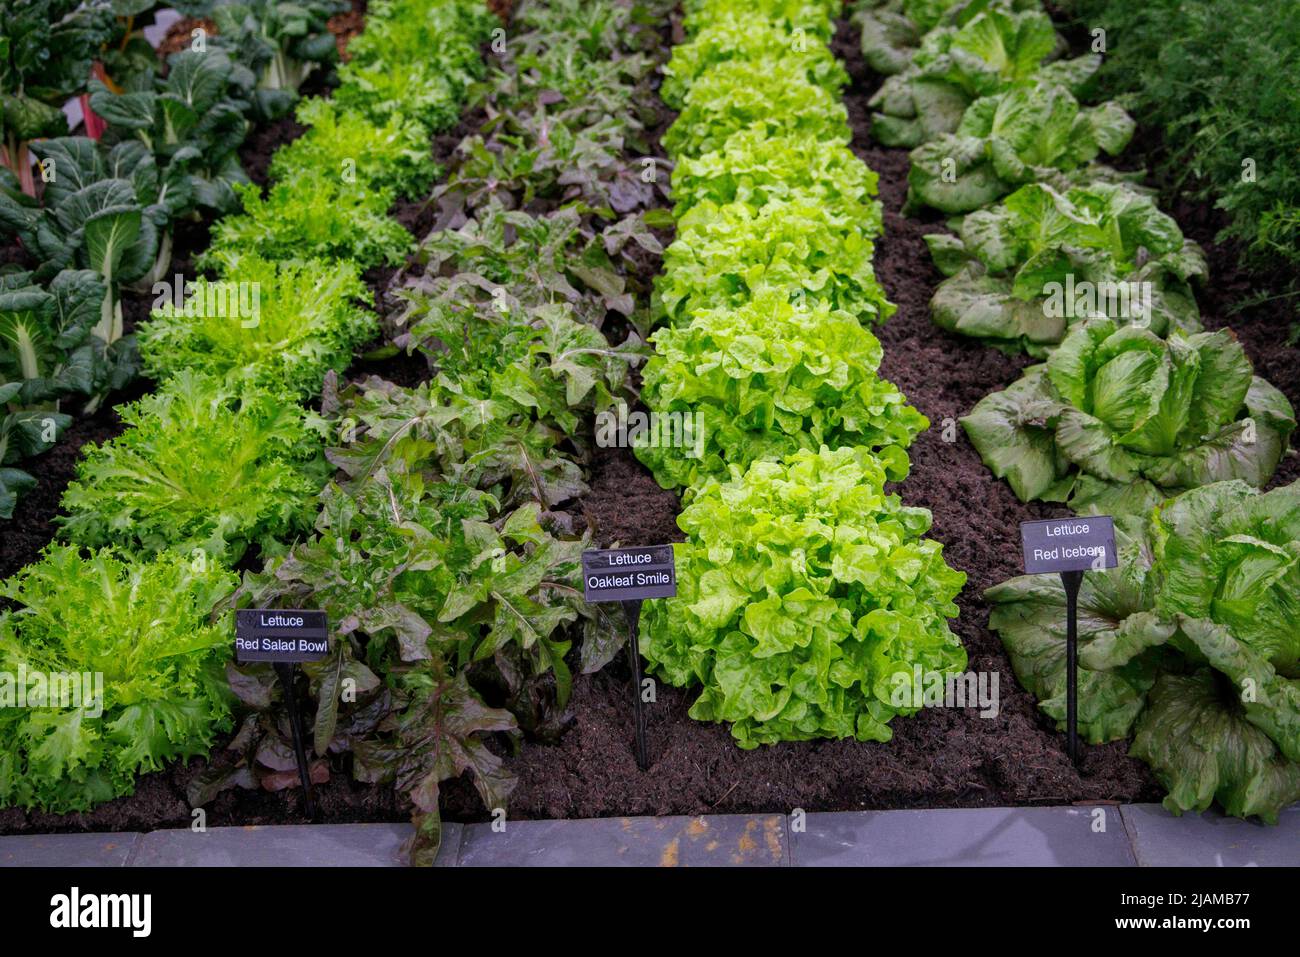 Rows of lettuces at the Allotment garden at the RHS Chelsea Flower Show. Stock Photo